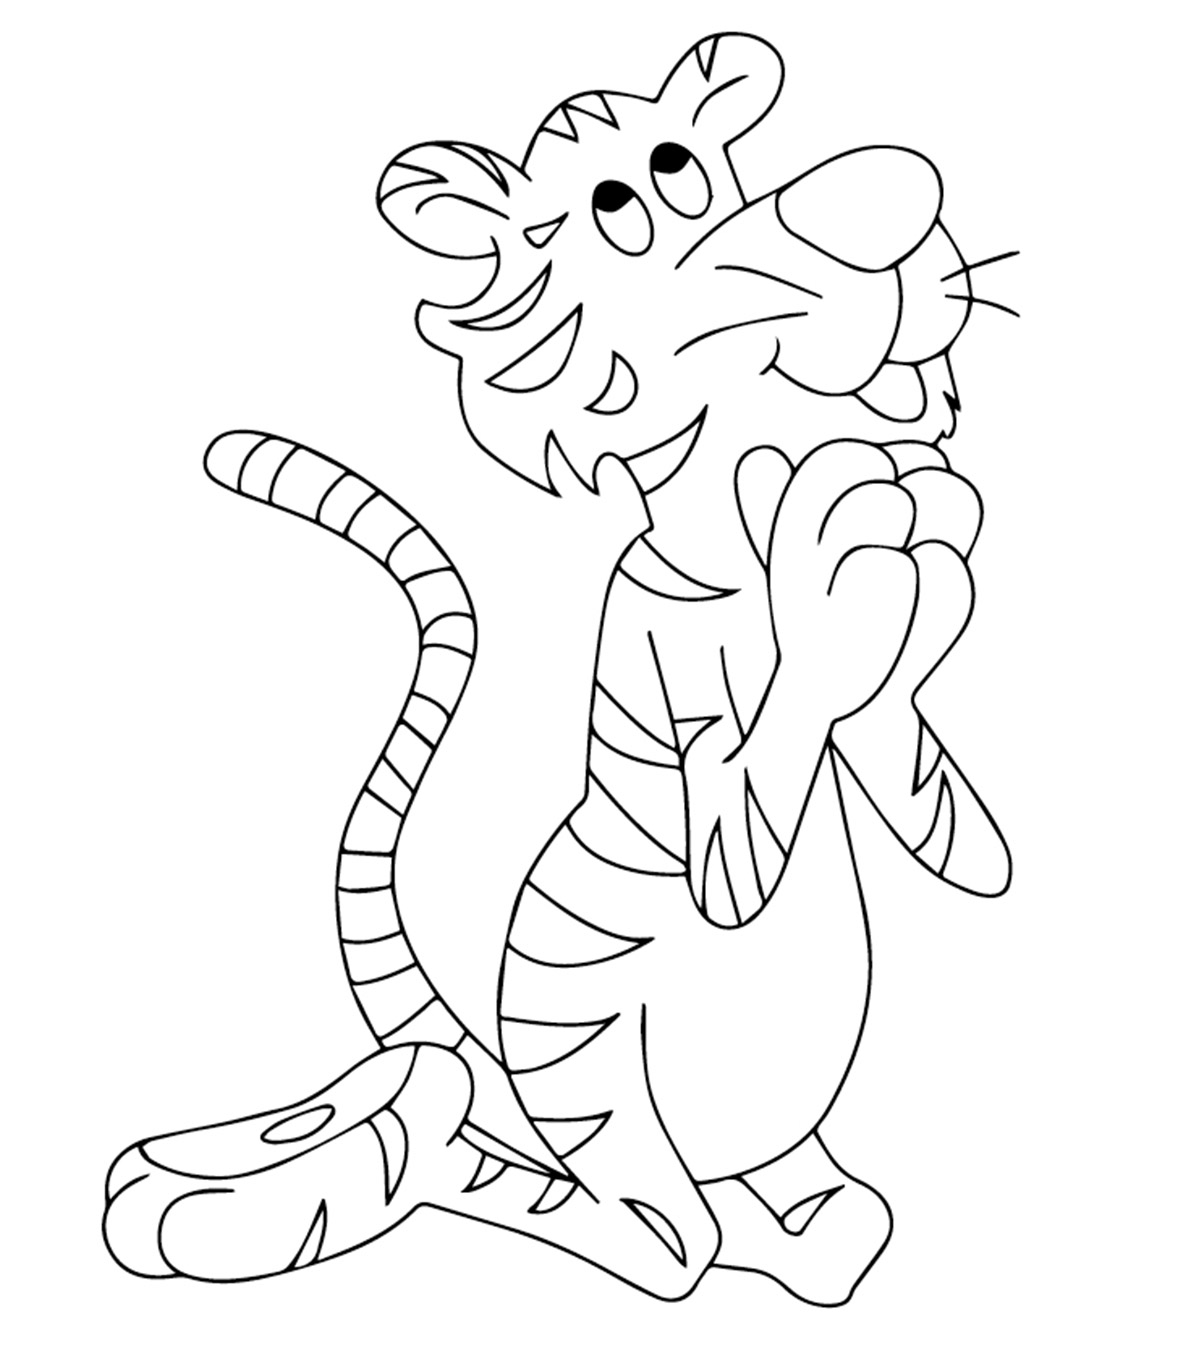 Top 20 Tiger Coloring Pages For Your Little Ones_image